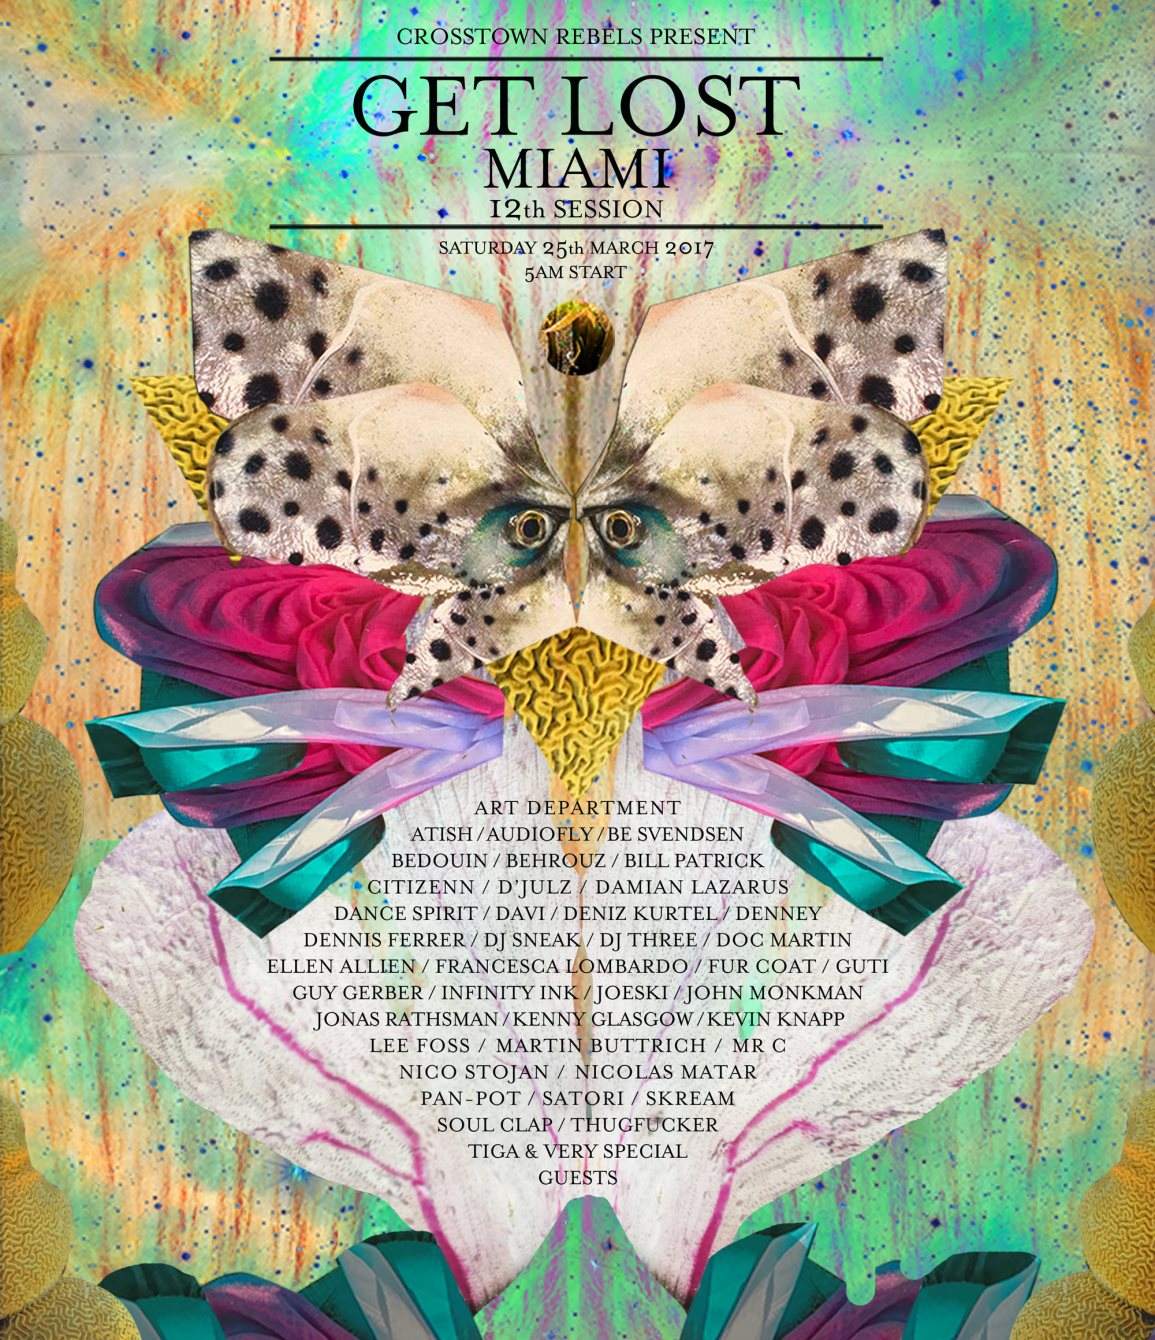 Crosstown Rebels present Get Lost Miami - 12th Session - フライヤー表